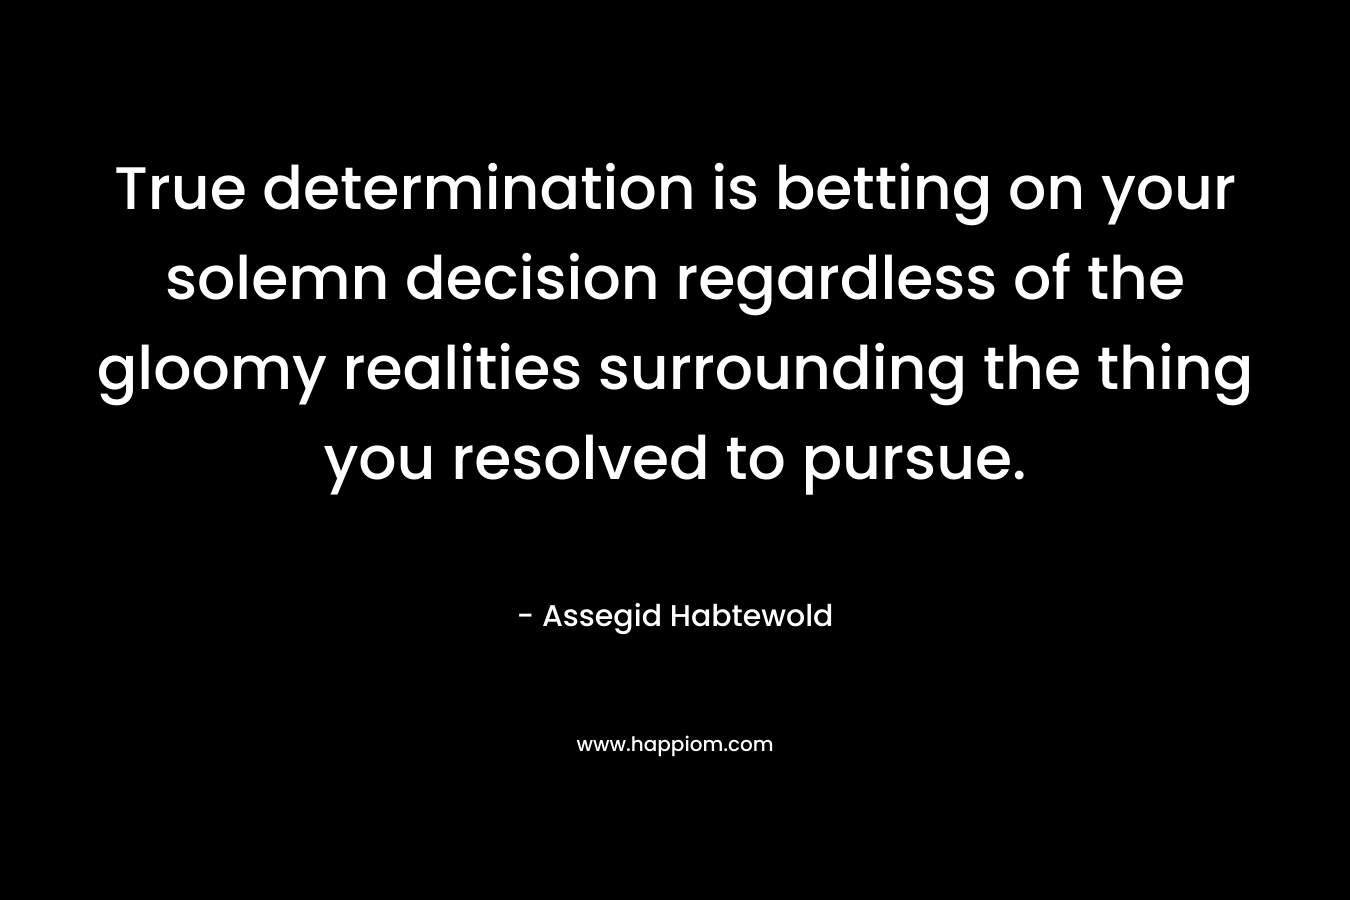 True determination is betting on your solemn decision regardless of the gloomy realities surrounding the thing you resolved to pursue. – Assegid Habtewold